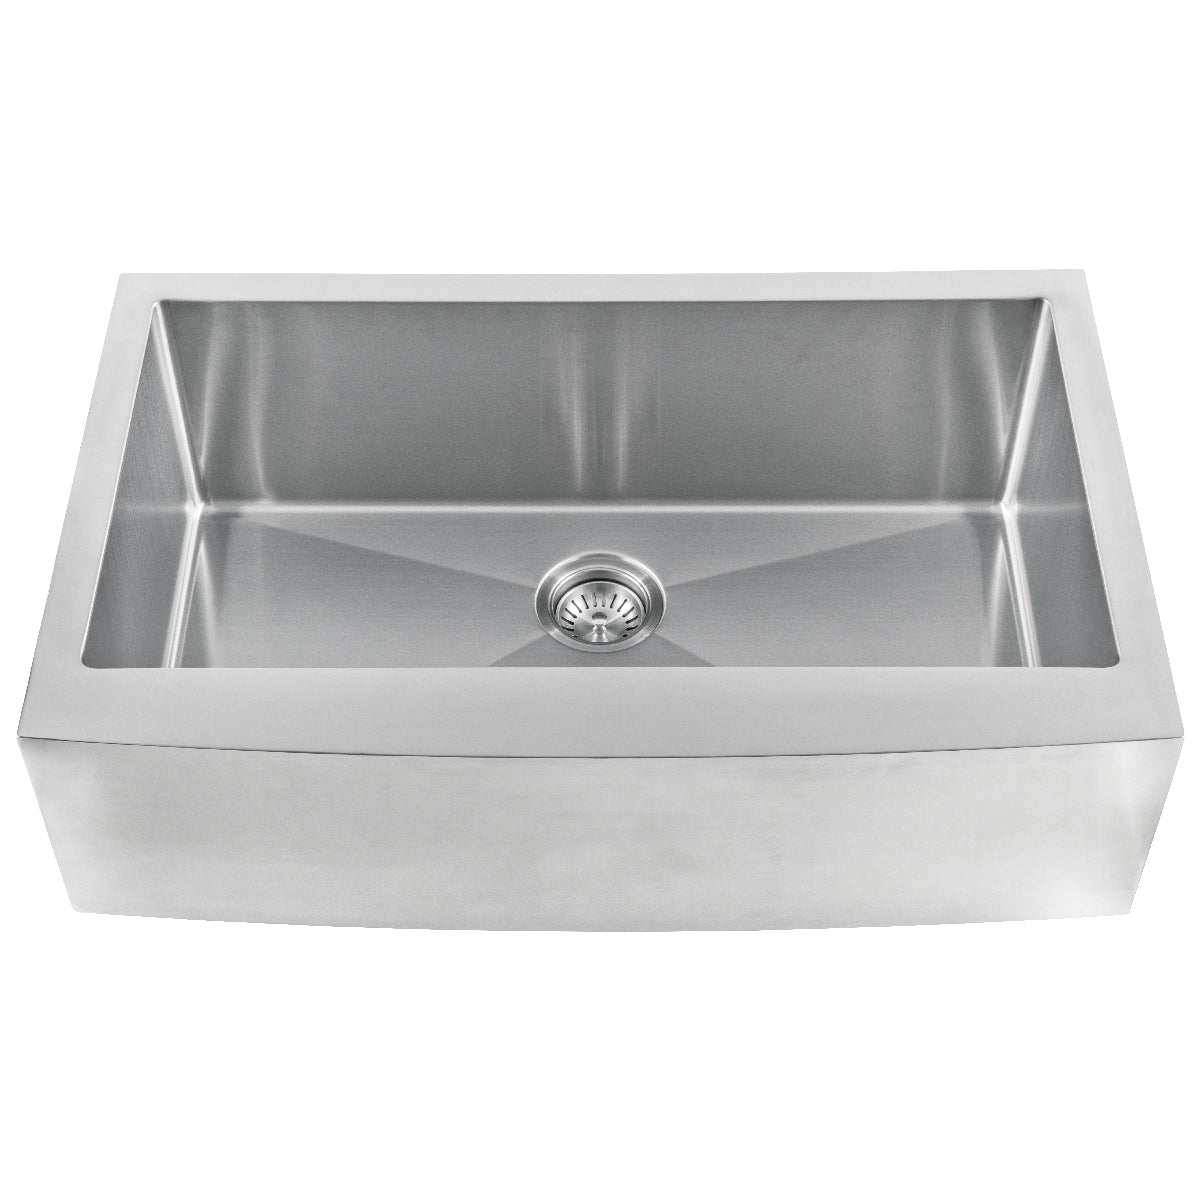 Stainless Steel Single Bowl Handcrafted Farmhouse With Apron Sink